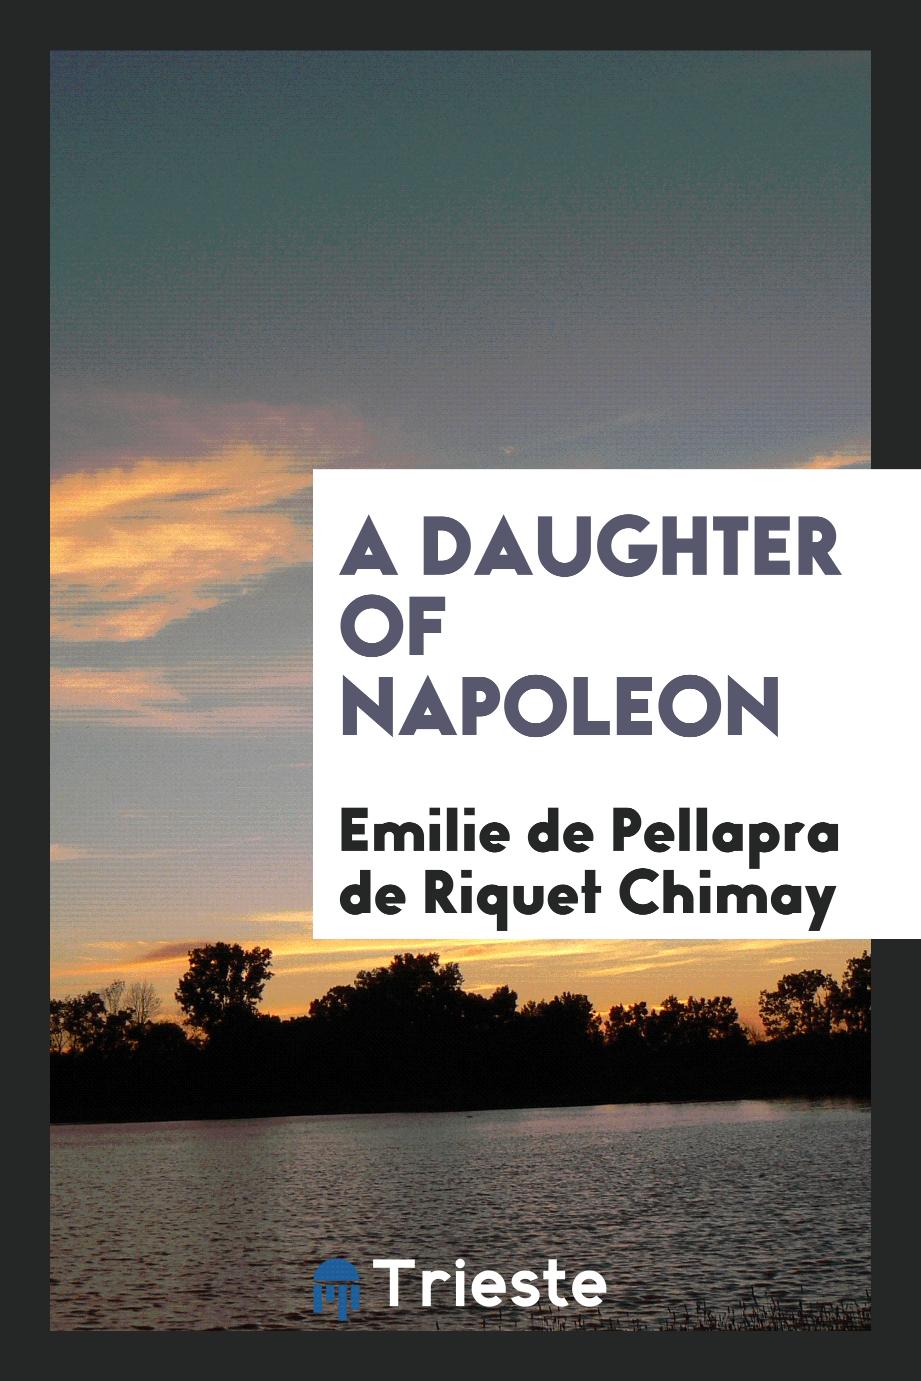 A daughter of Napoleon